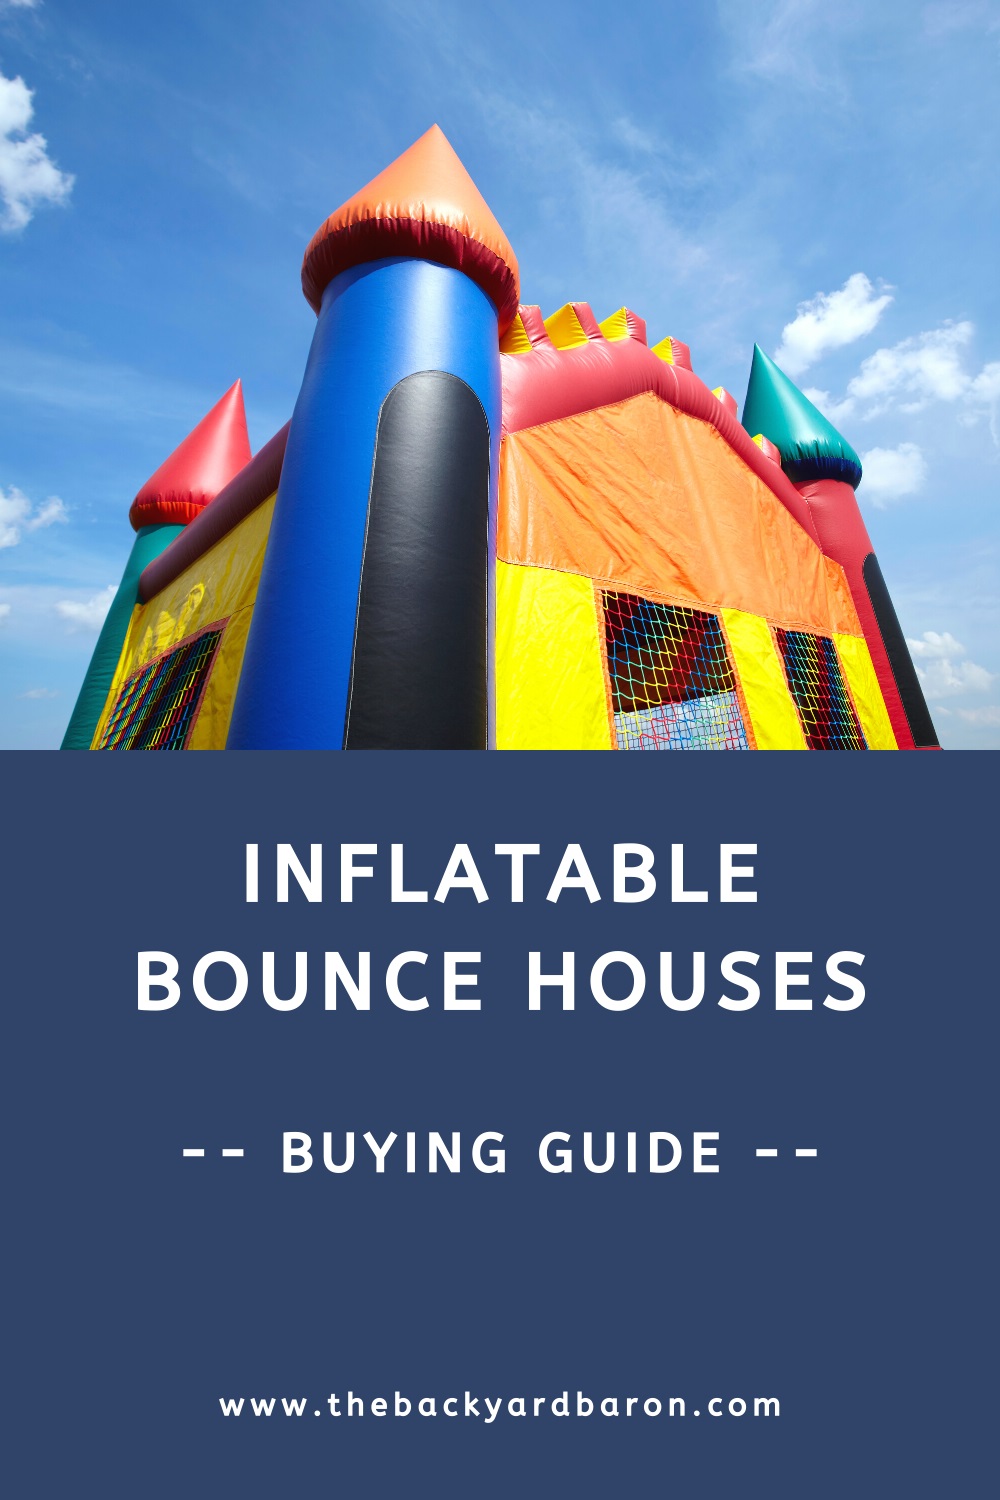 Outdoor inflatable bounce house buying guide